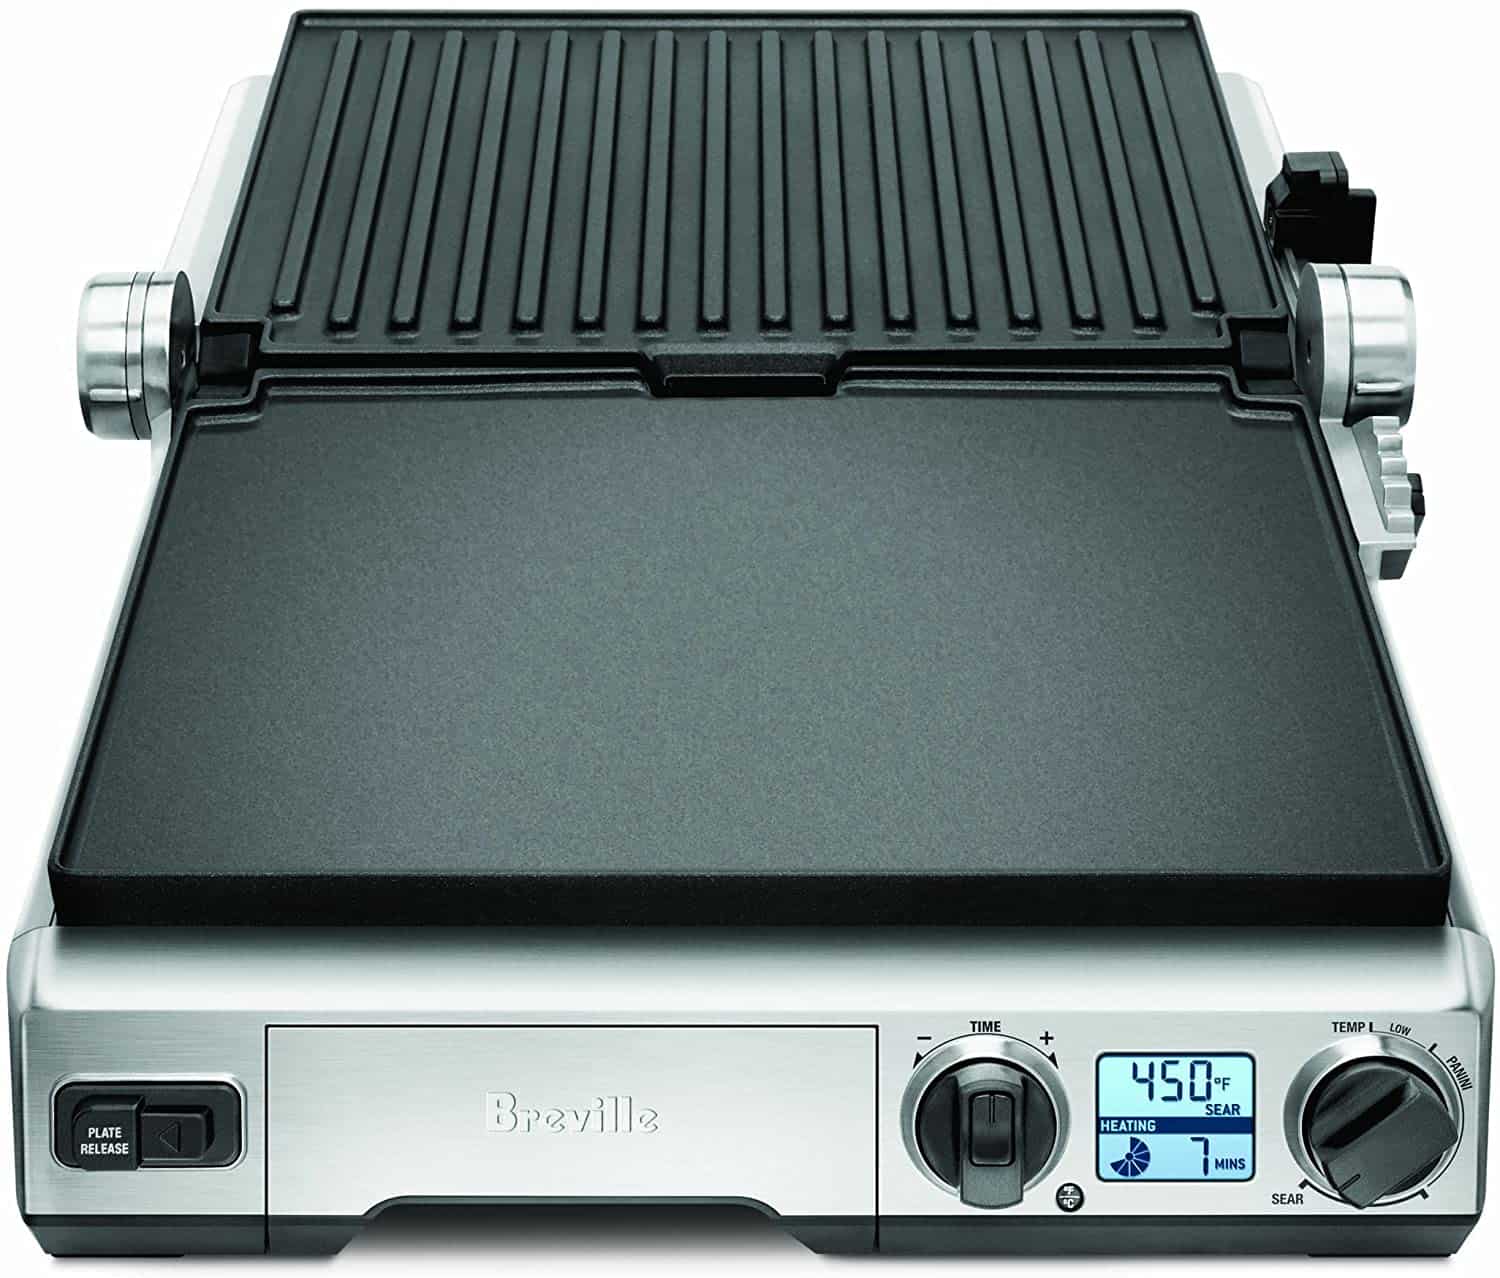 Best indoor grill with a flat ‘BBQ mode’- Breville BGR820XL Smart Grill